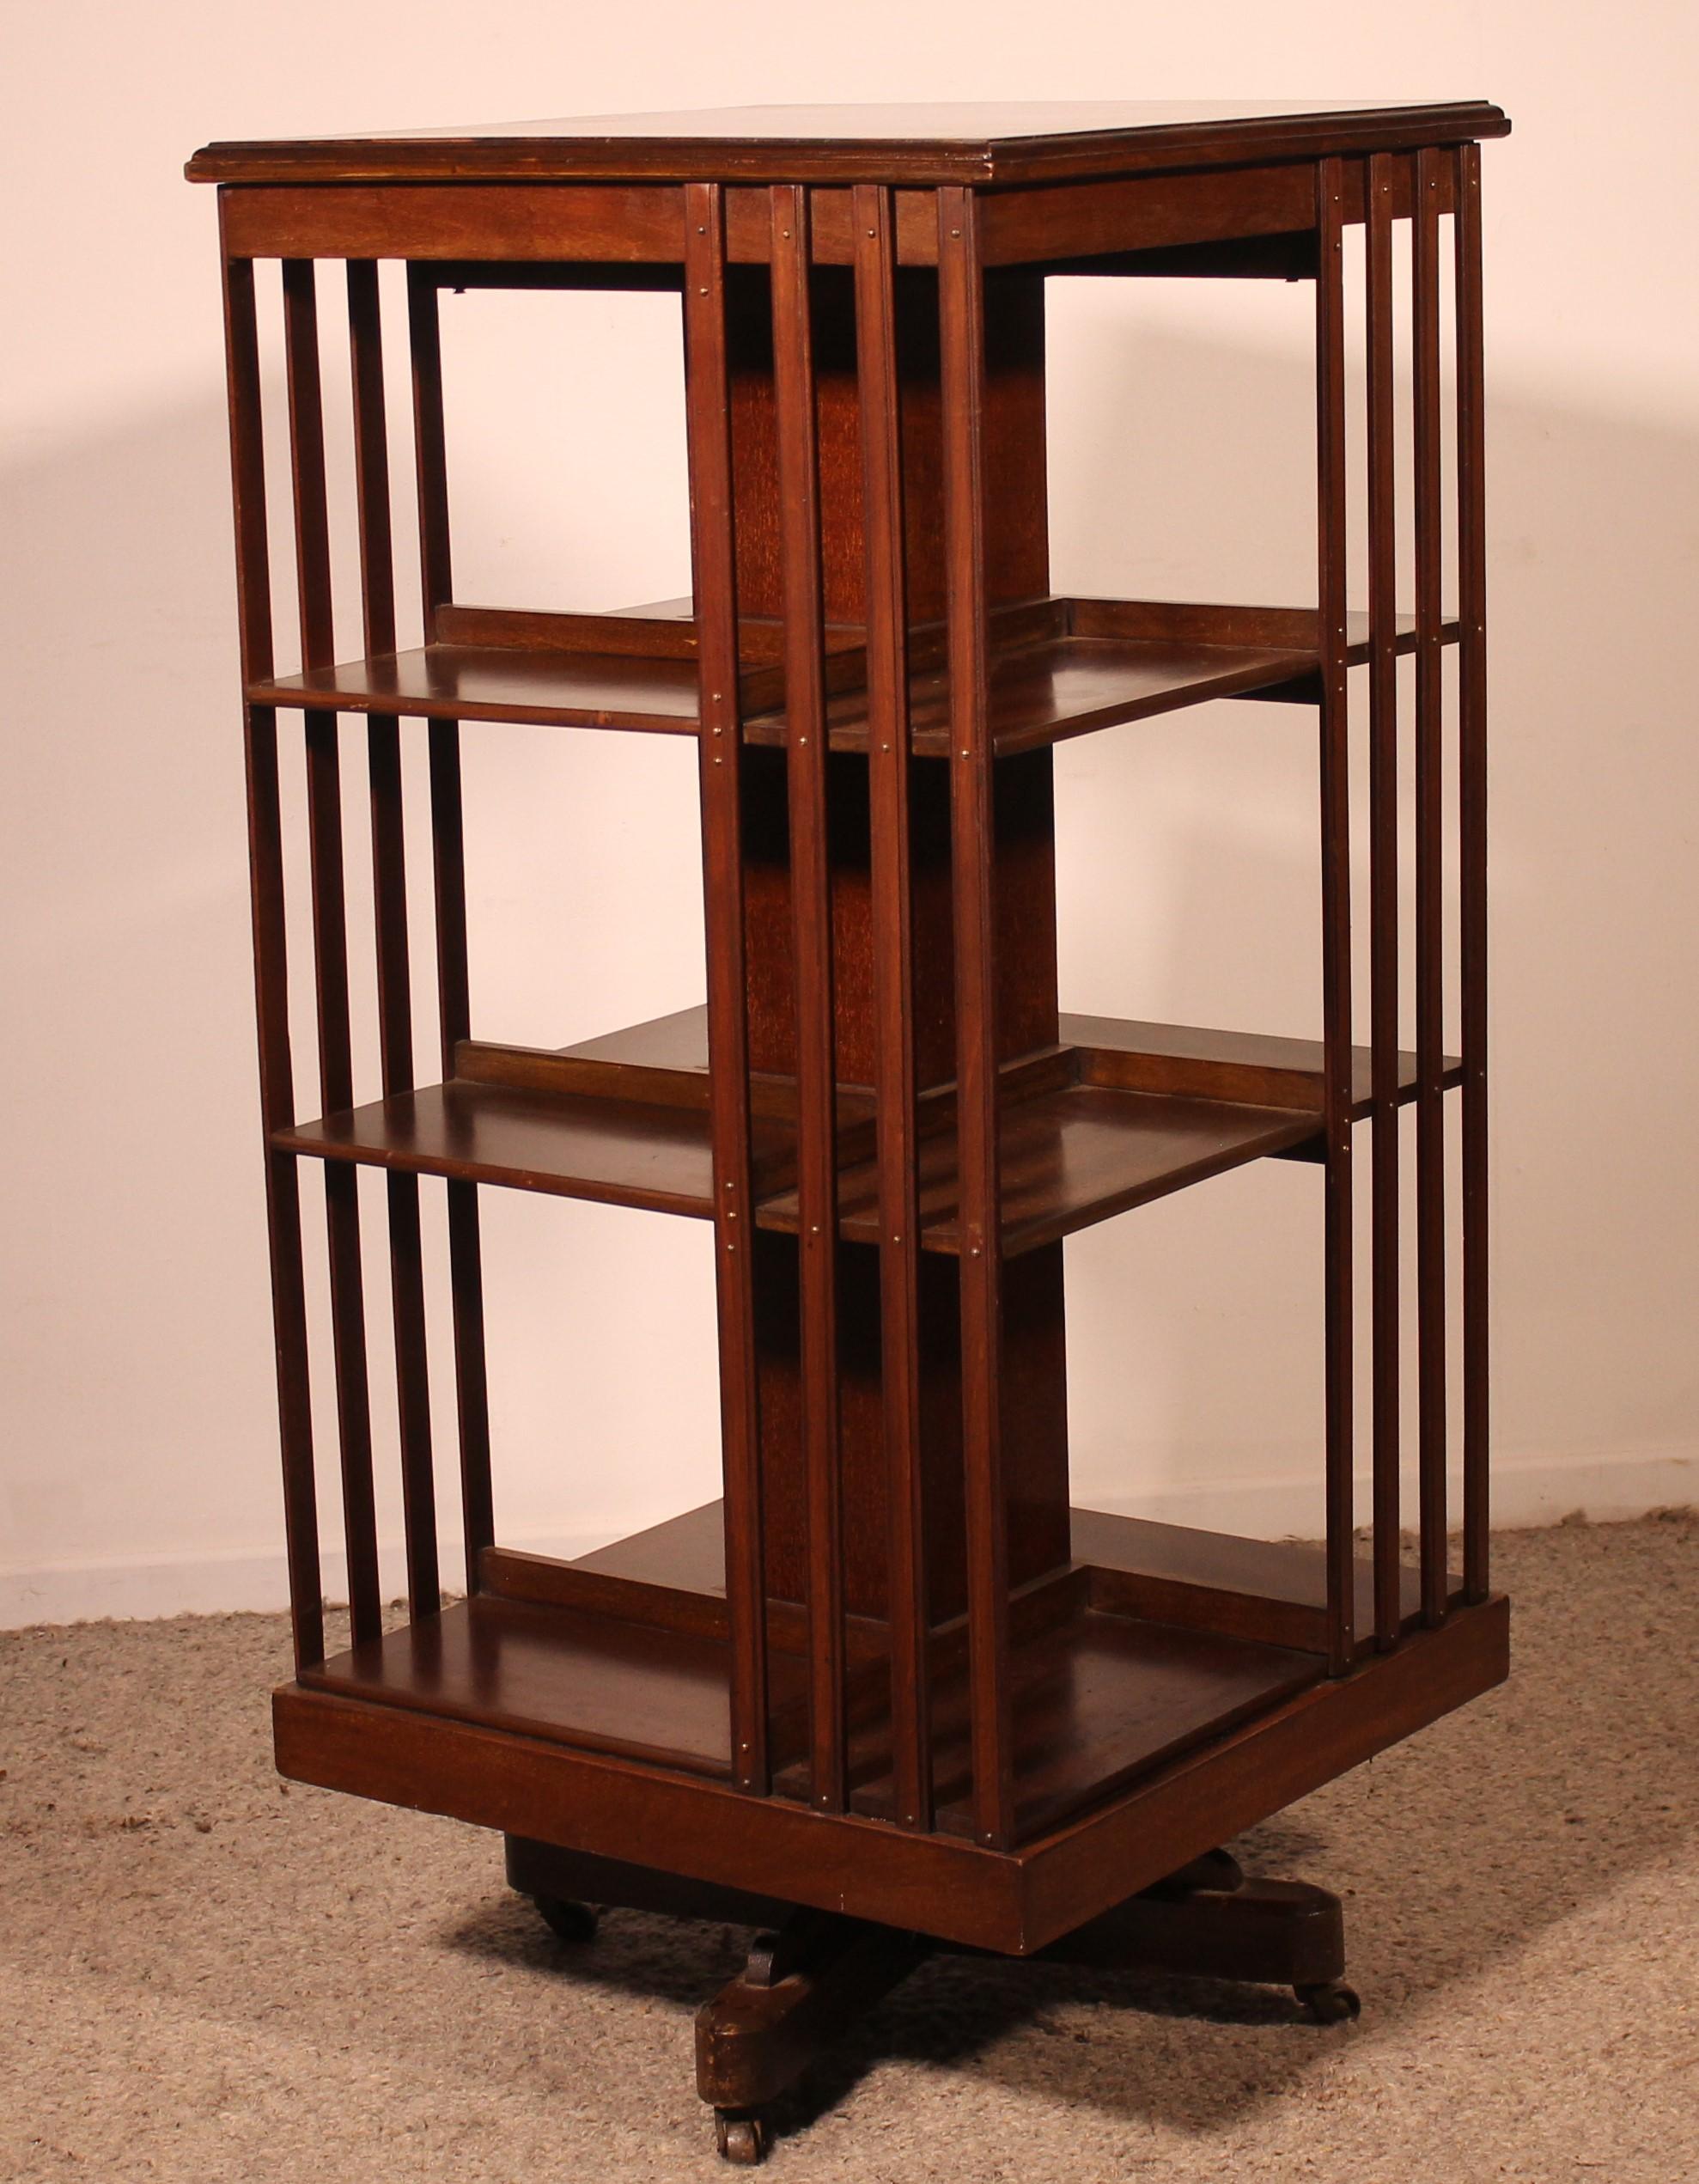 Elegant large revolving bookcase in mahogany from the 19th century from England
Very beautiful mahogany bookcase which has three levels which is unusual since almost all the time they only have two floors
Very beautiful patina and in very good